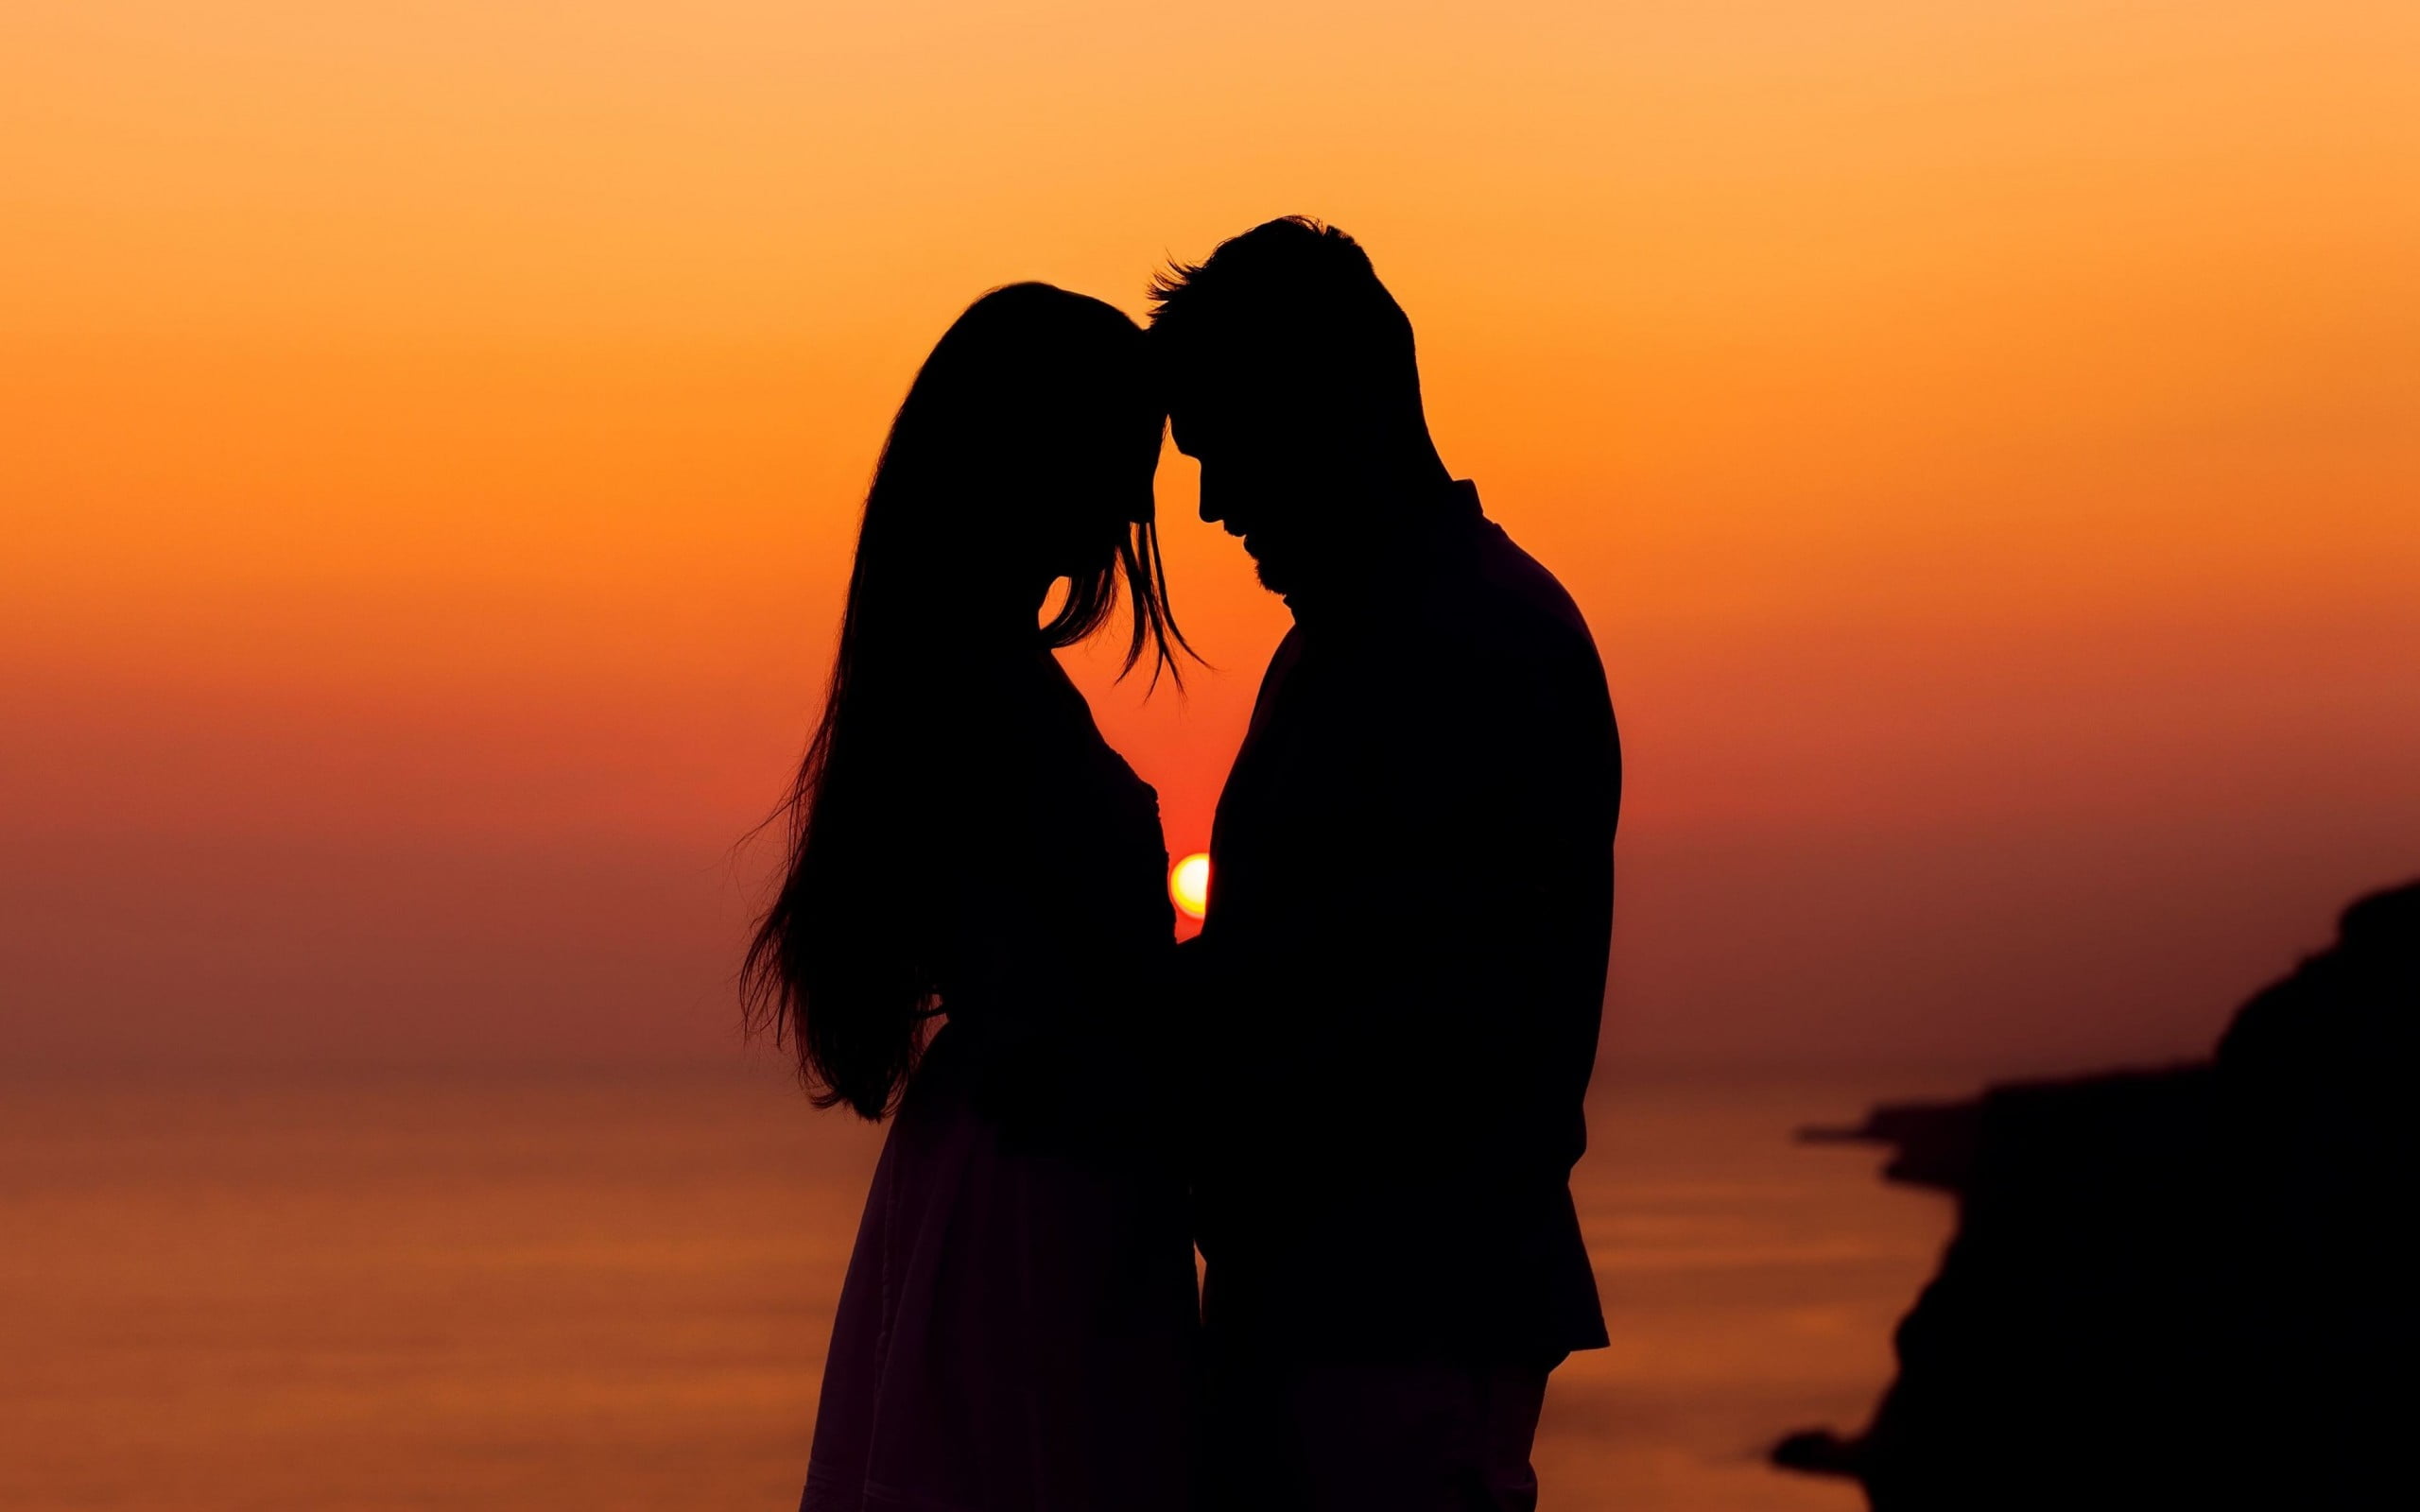 Boy And Girl Silhouette Sunset - HD Wallpaper 